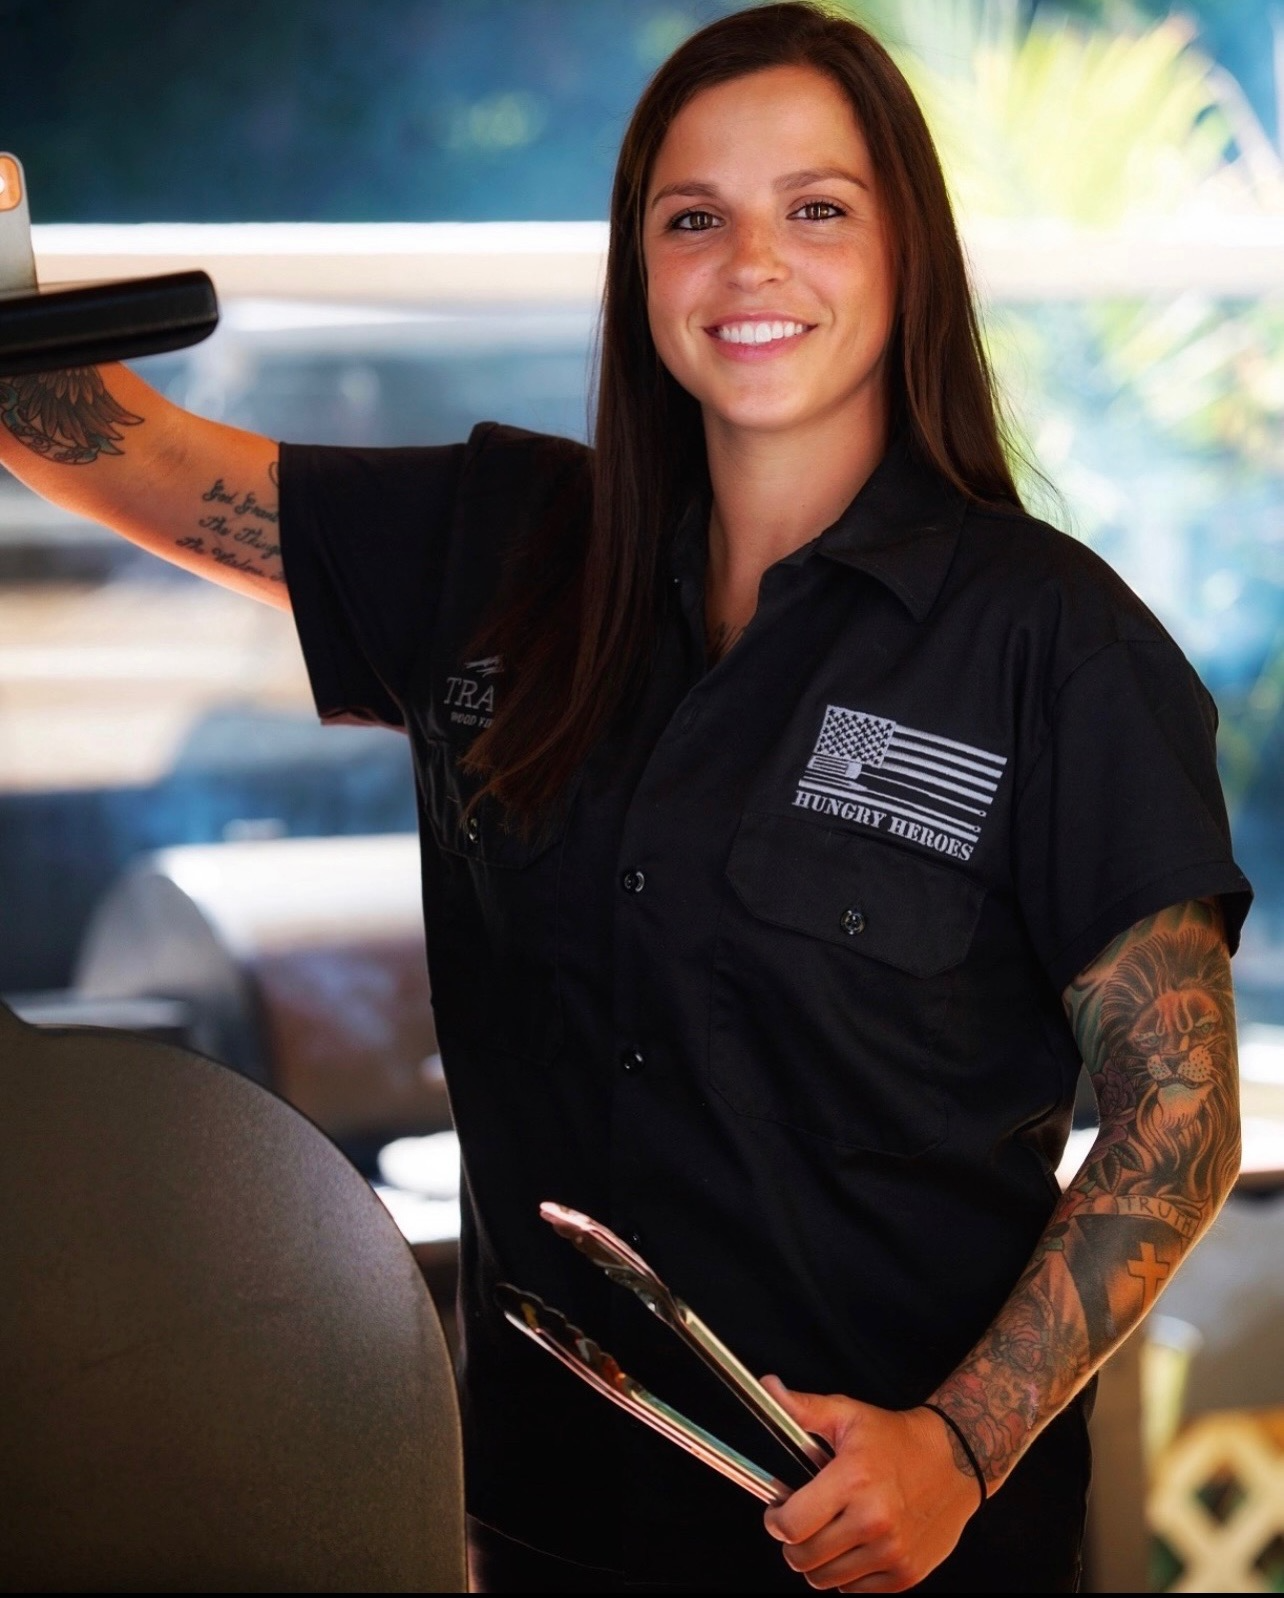 Girl standing holding grill tongs standing in front of an open grill wearing a black short-sleeved button down shirt with long brown hair and smiling.